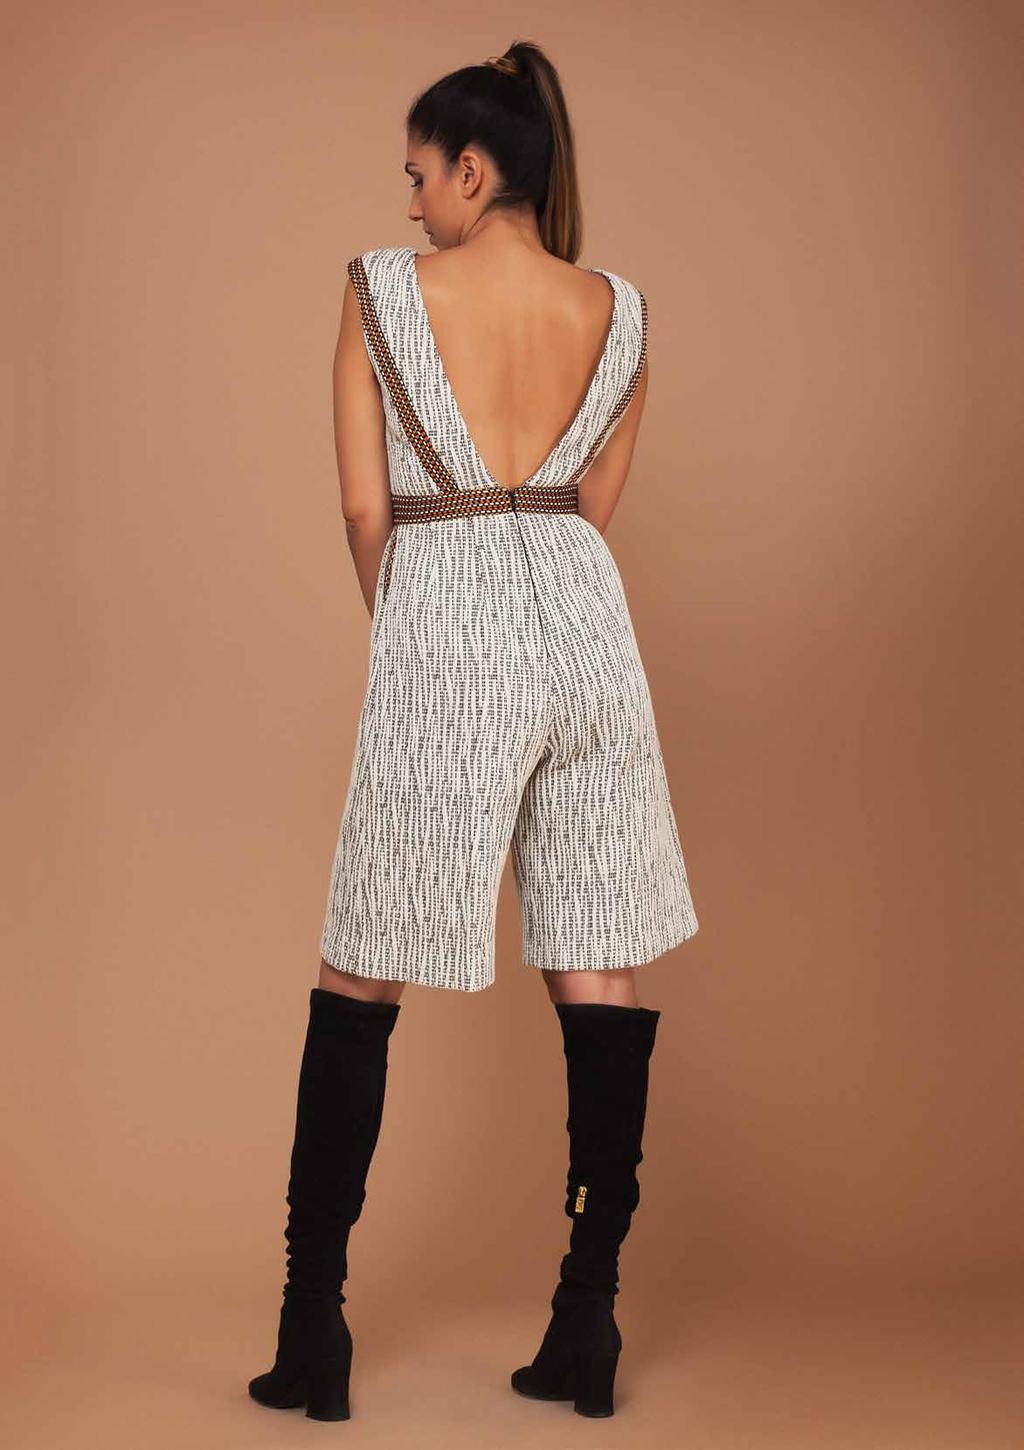 Black and white cotton blend jumpsuit with orange contrast panelling Style Code: J1BC0027B/WE Black and white cotton blend jumpsuit with